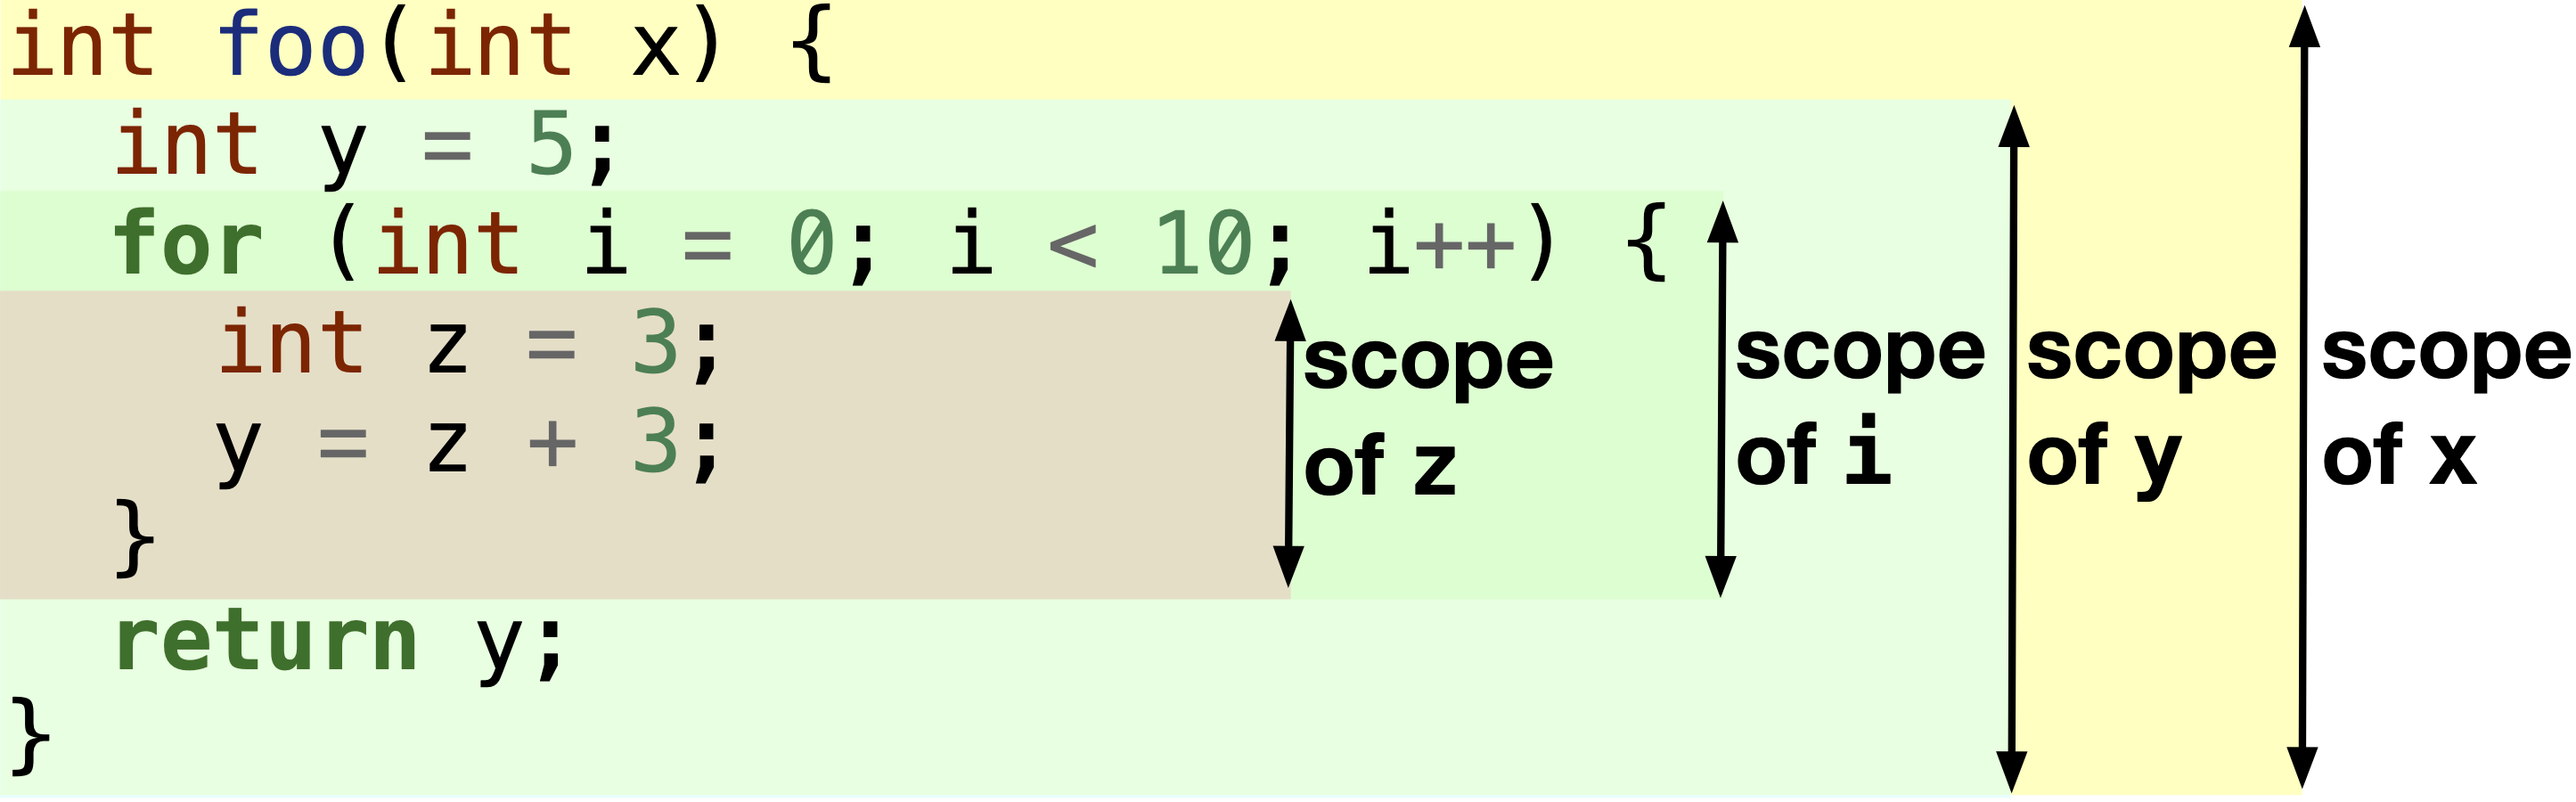 Scope of different variables in a function.